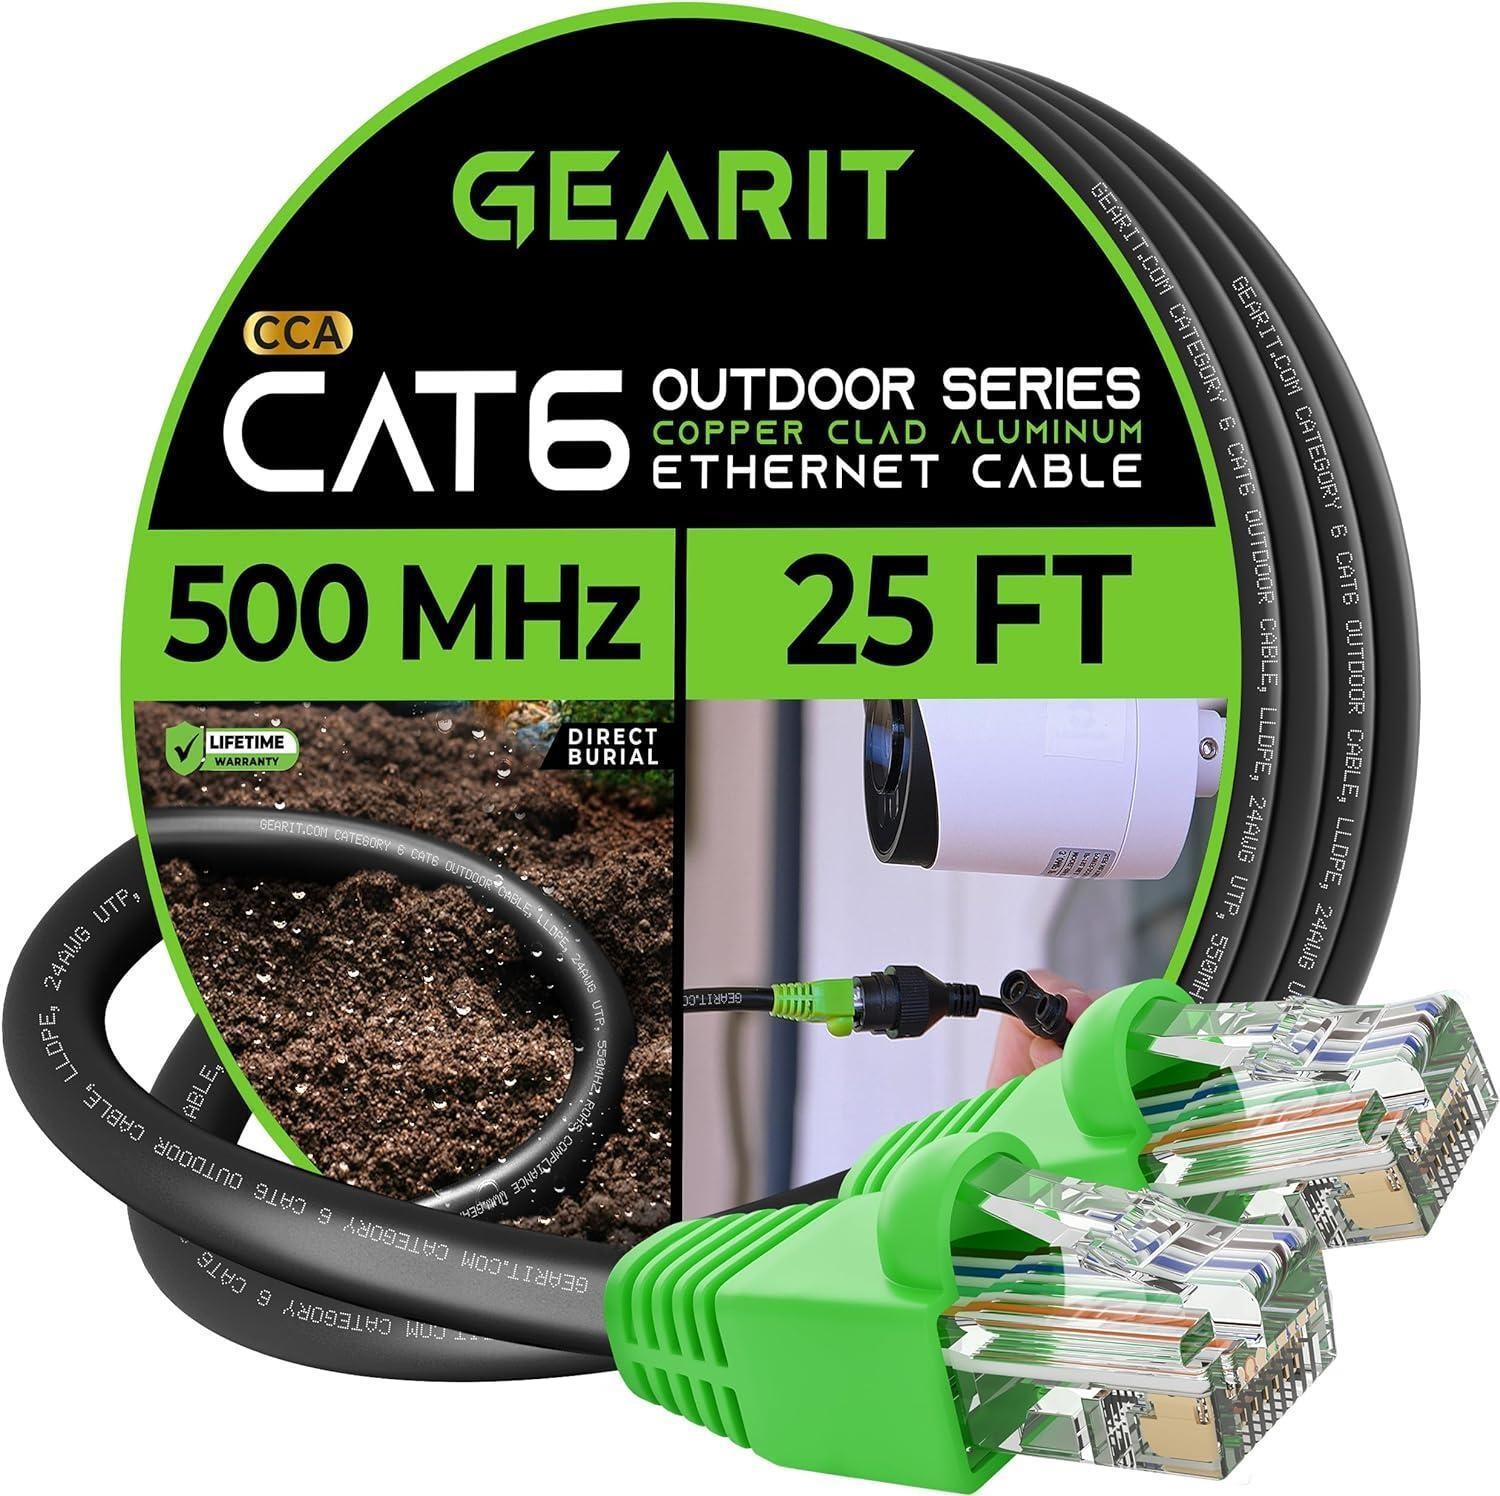 ULN - GearIT Cat6 Outdoor Ethernet Cable